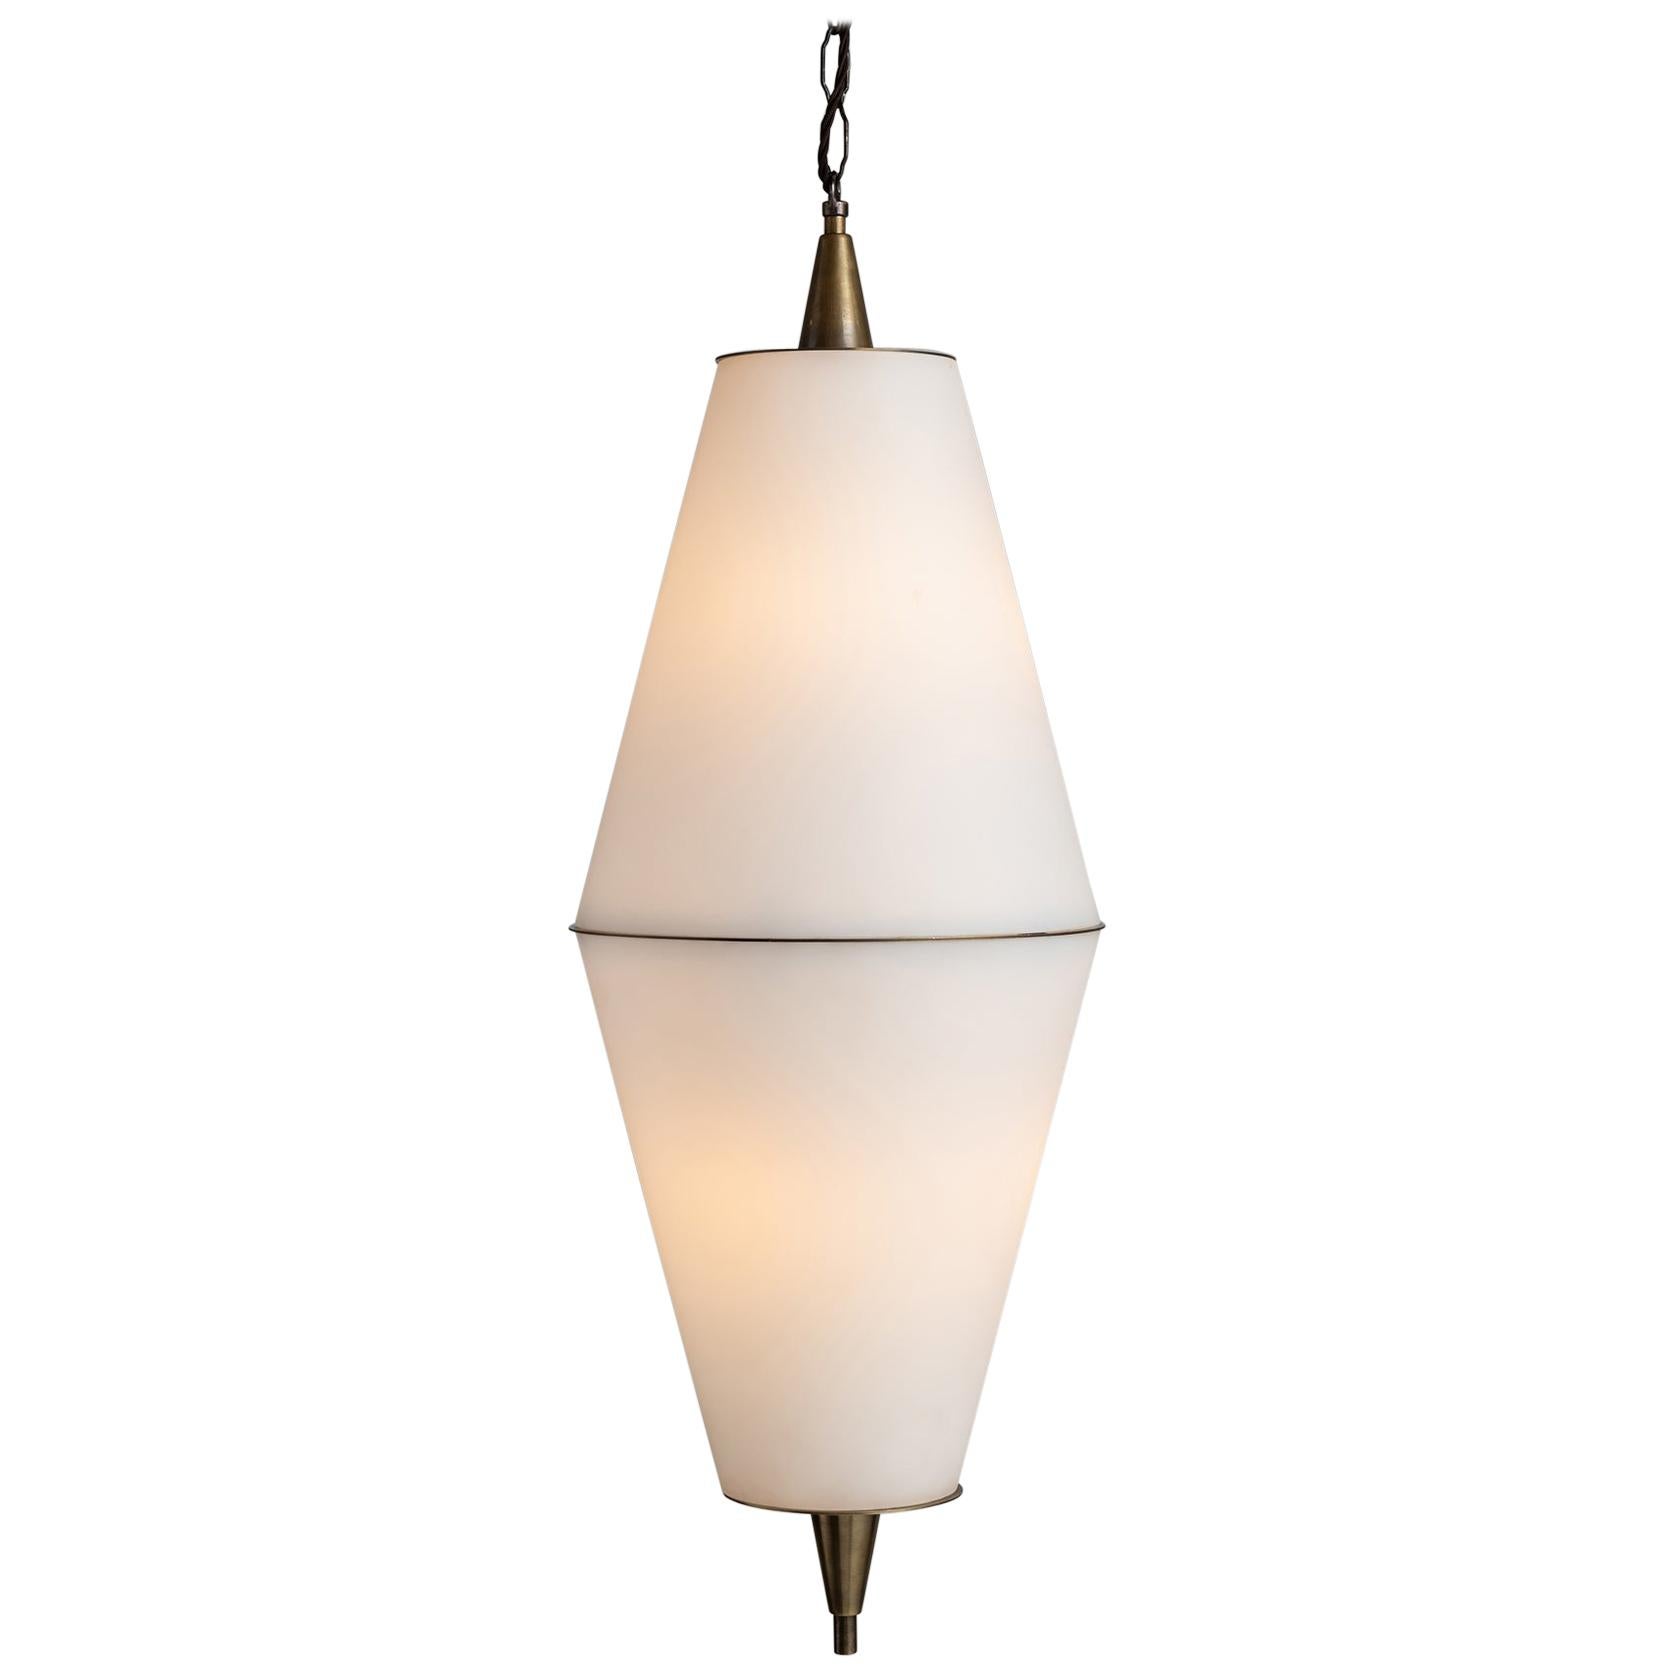 Prismatic Opaline Pendant, Made in Italy